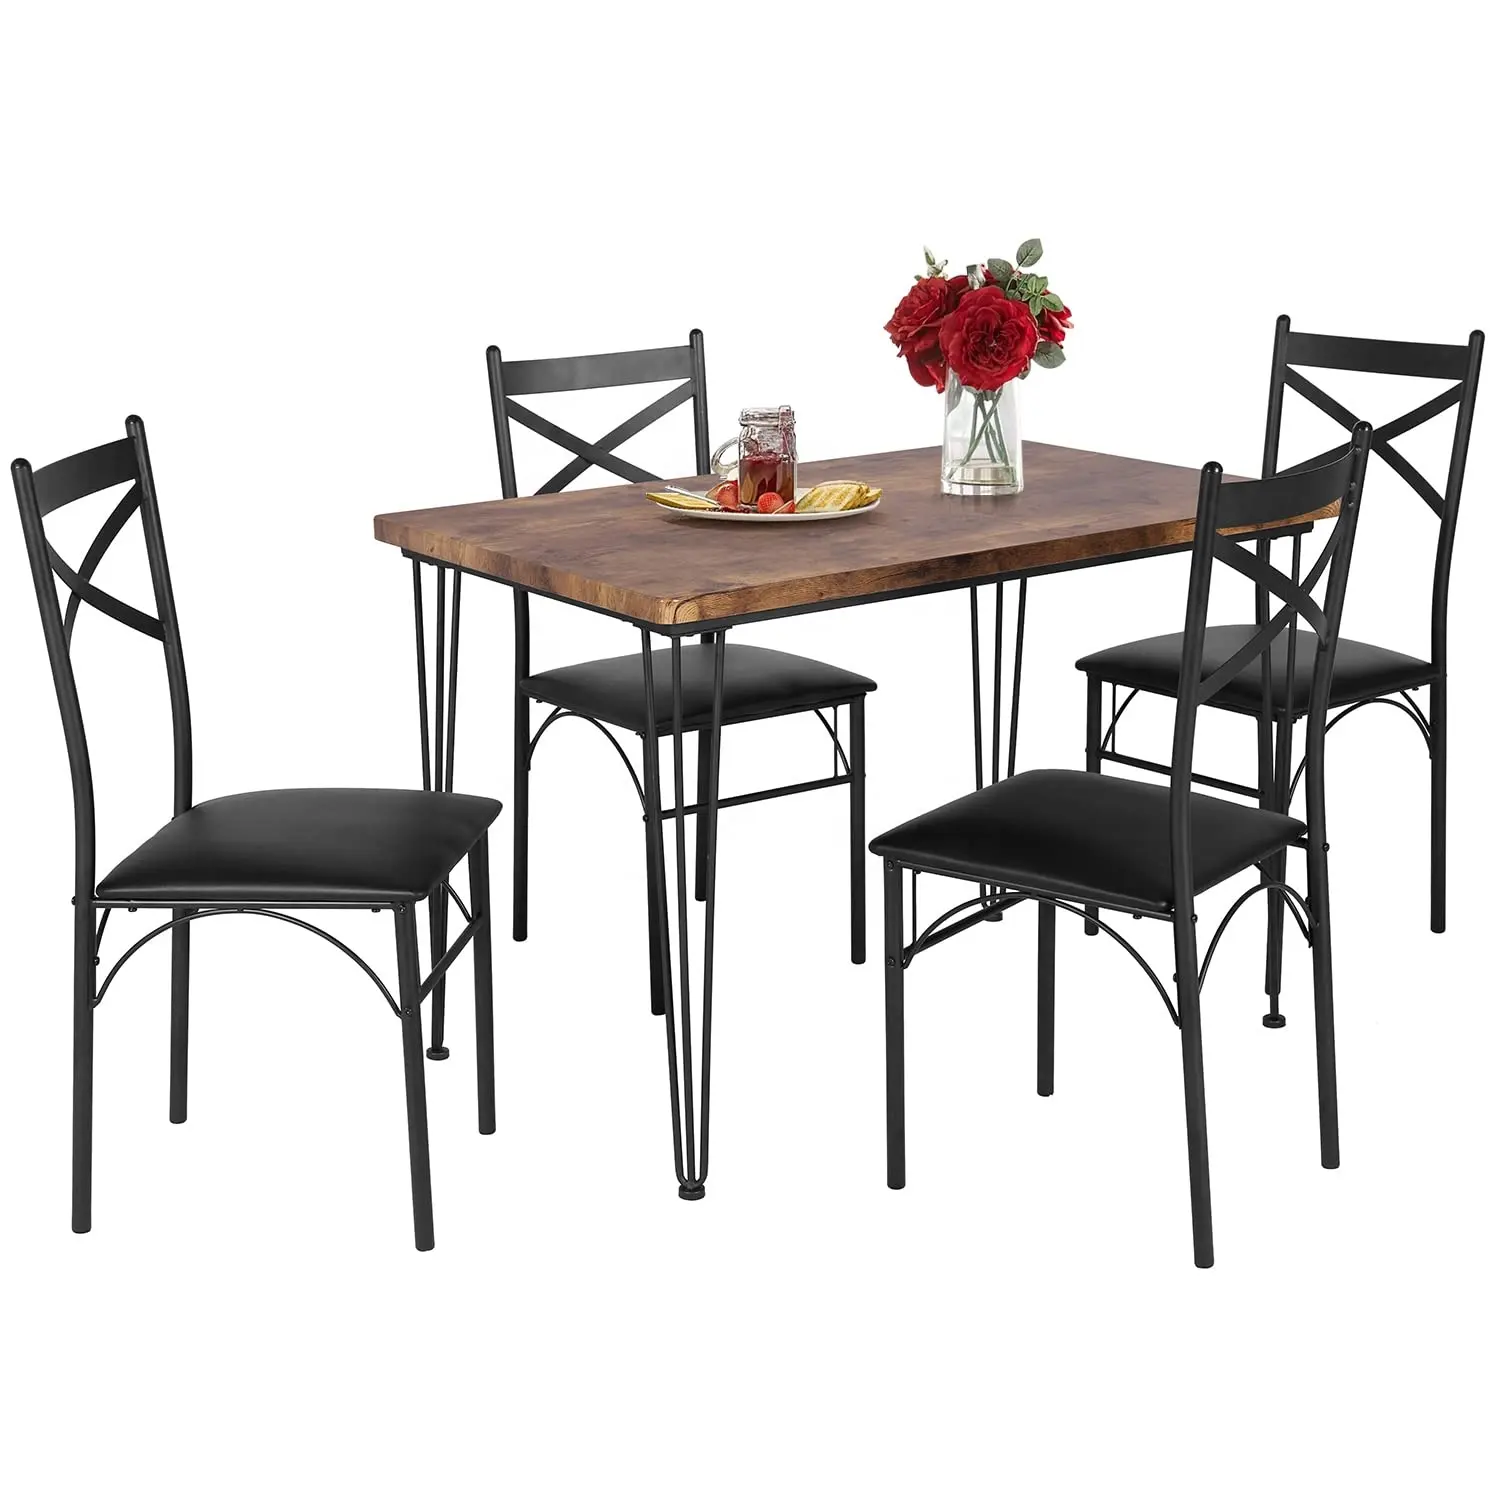 Modern Rectangular Kitchen Tables with Chairs for Dinette Breakfast Nook Brown Dining Table Set for 4